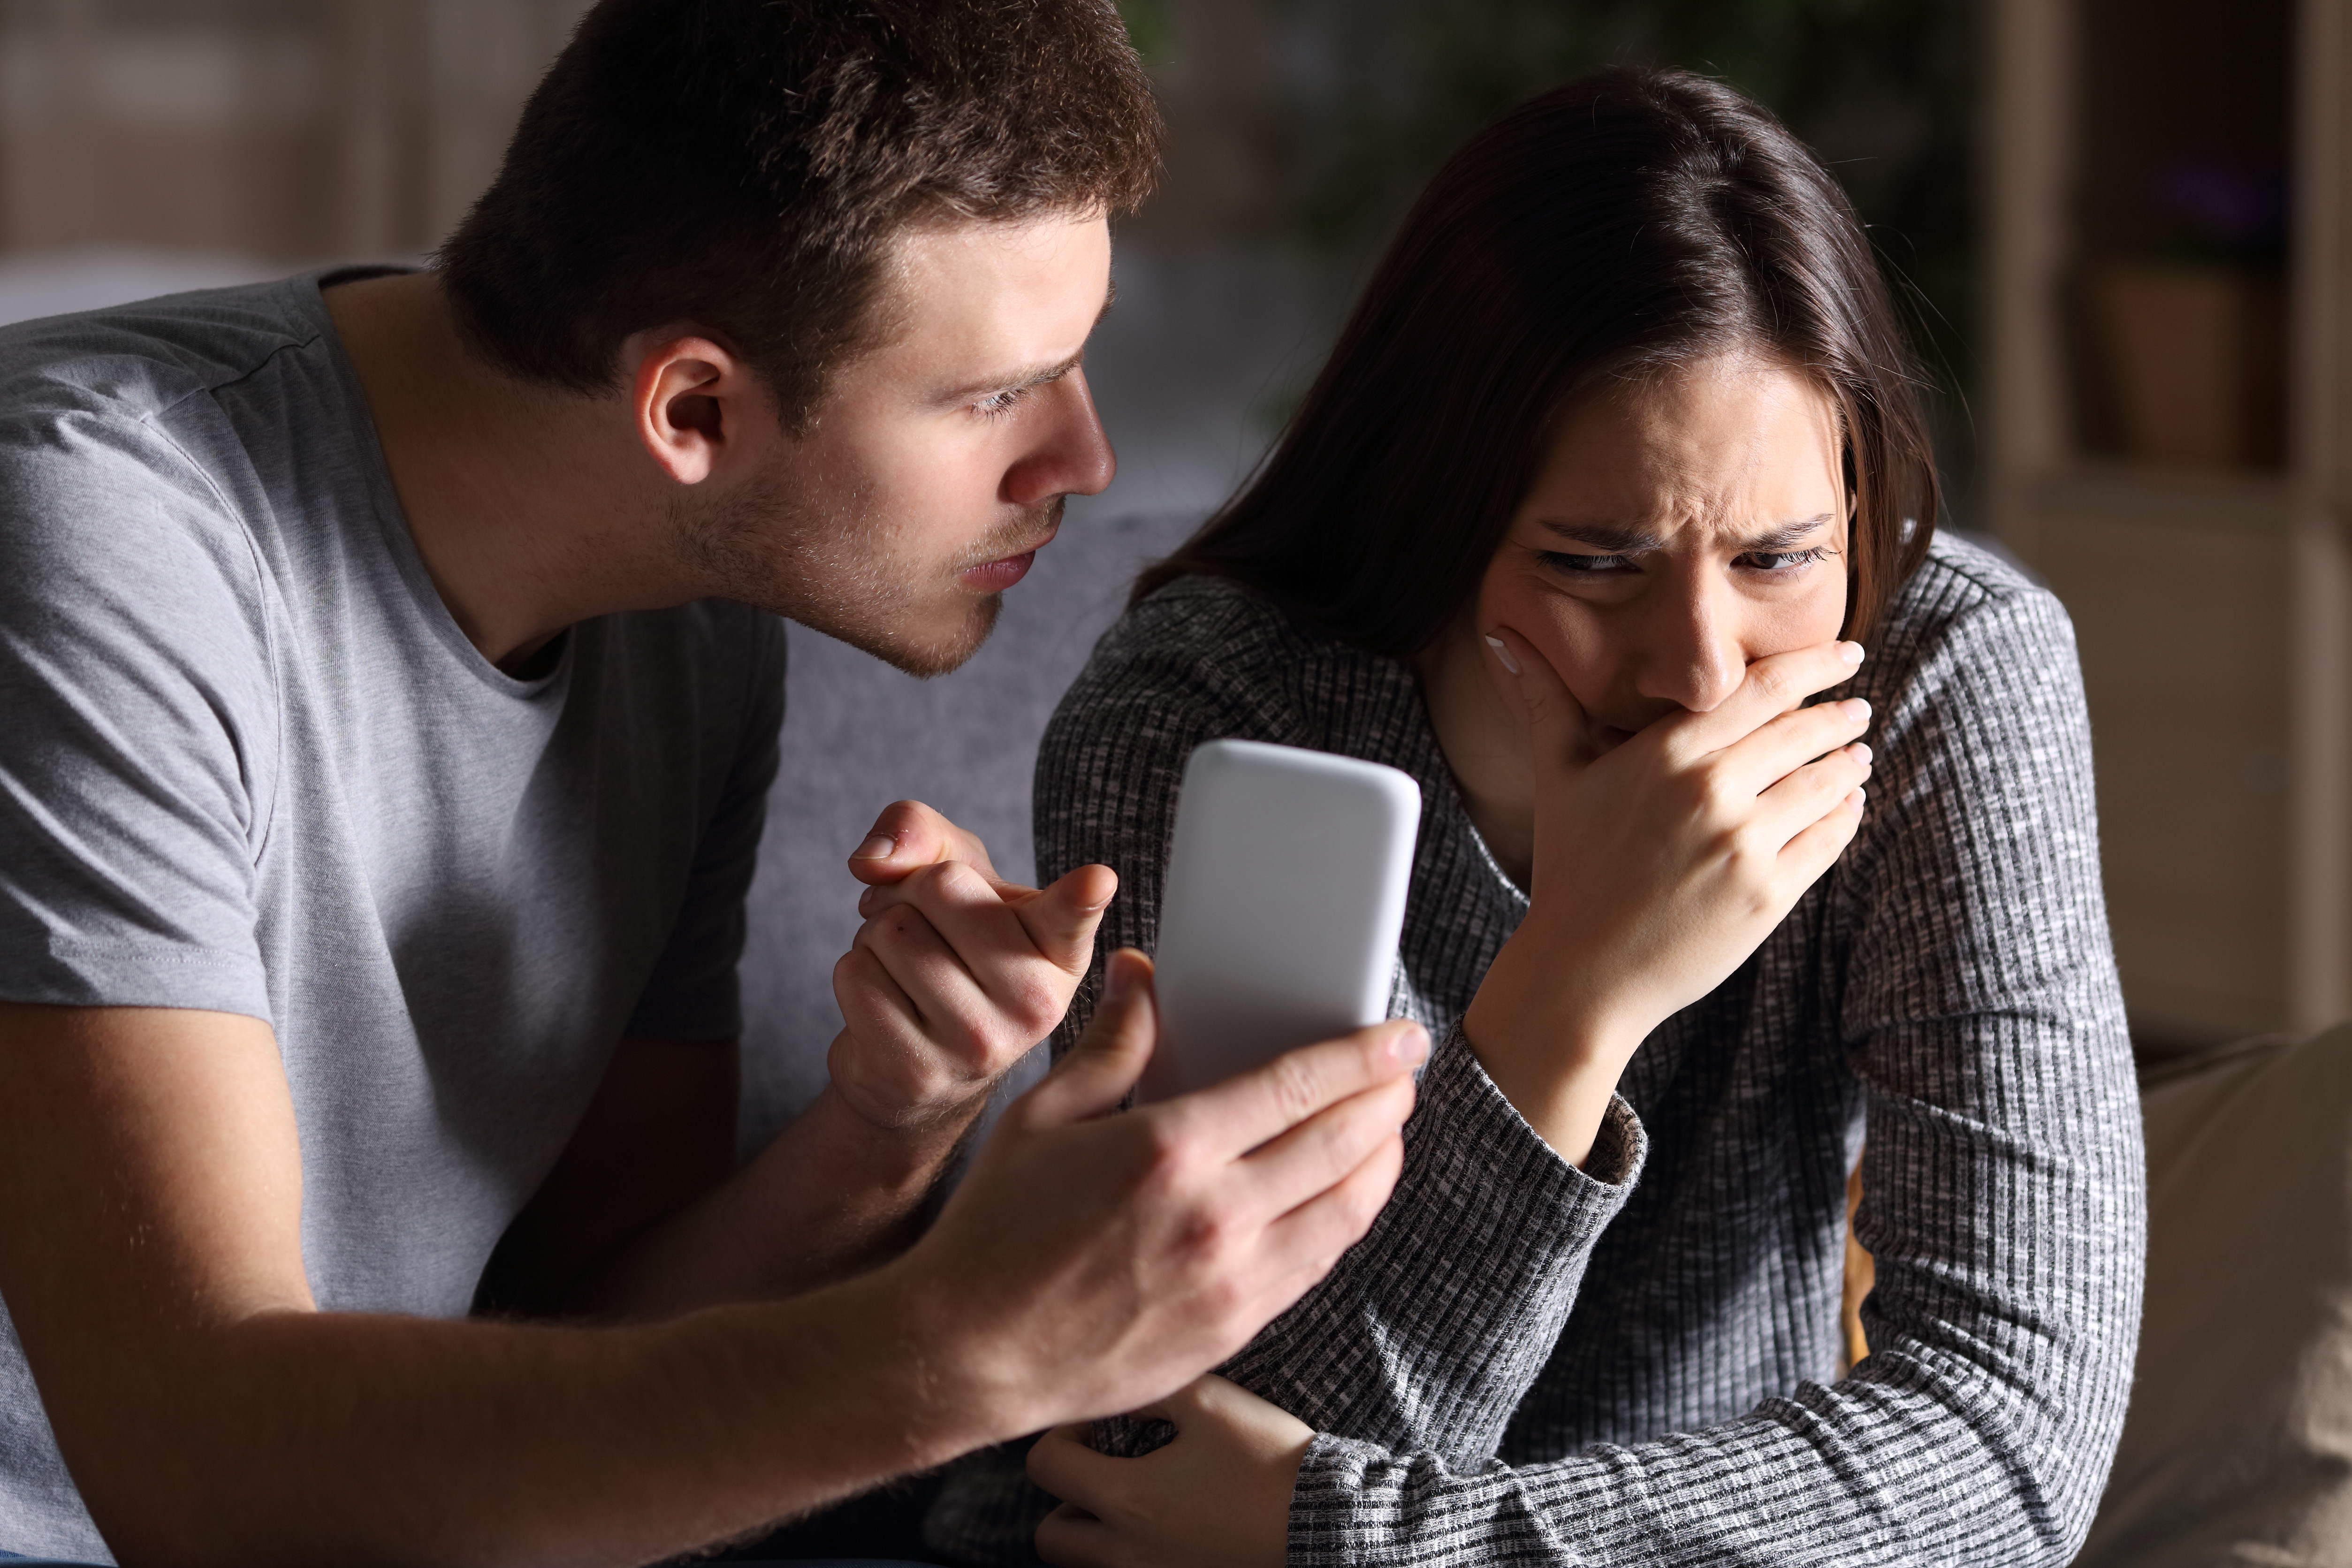 A husband asks for an explanation from his sad, cheating wife while sitting on the couch in their home. | Source: Shutterstock